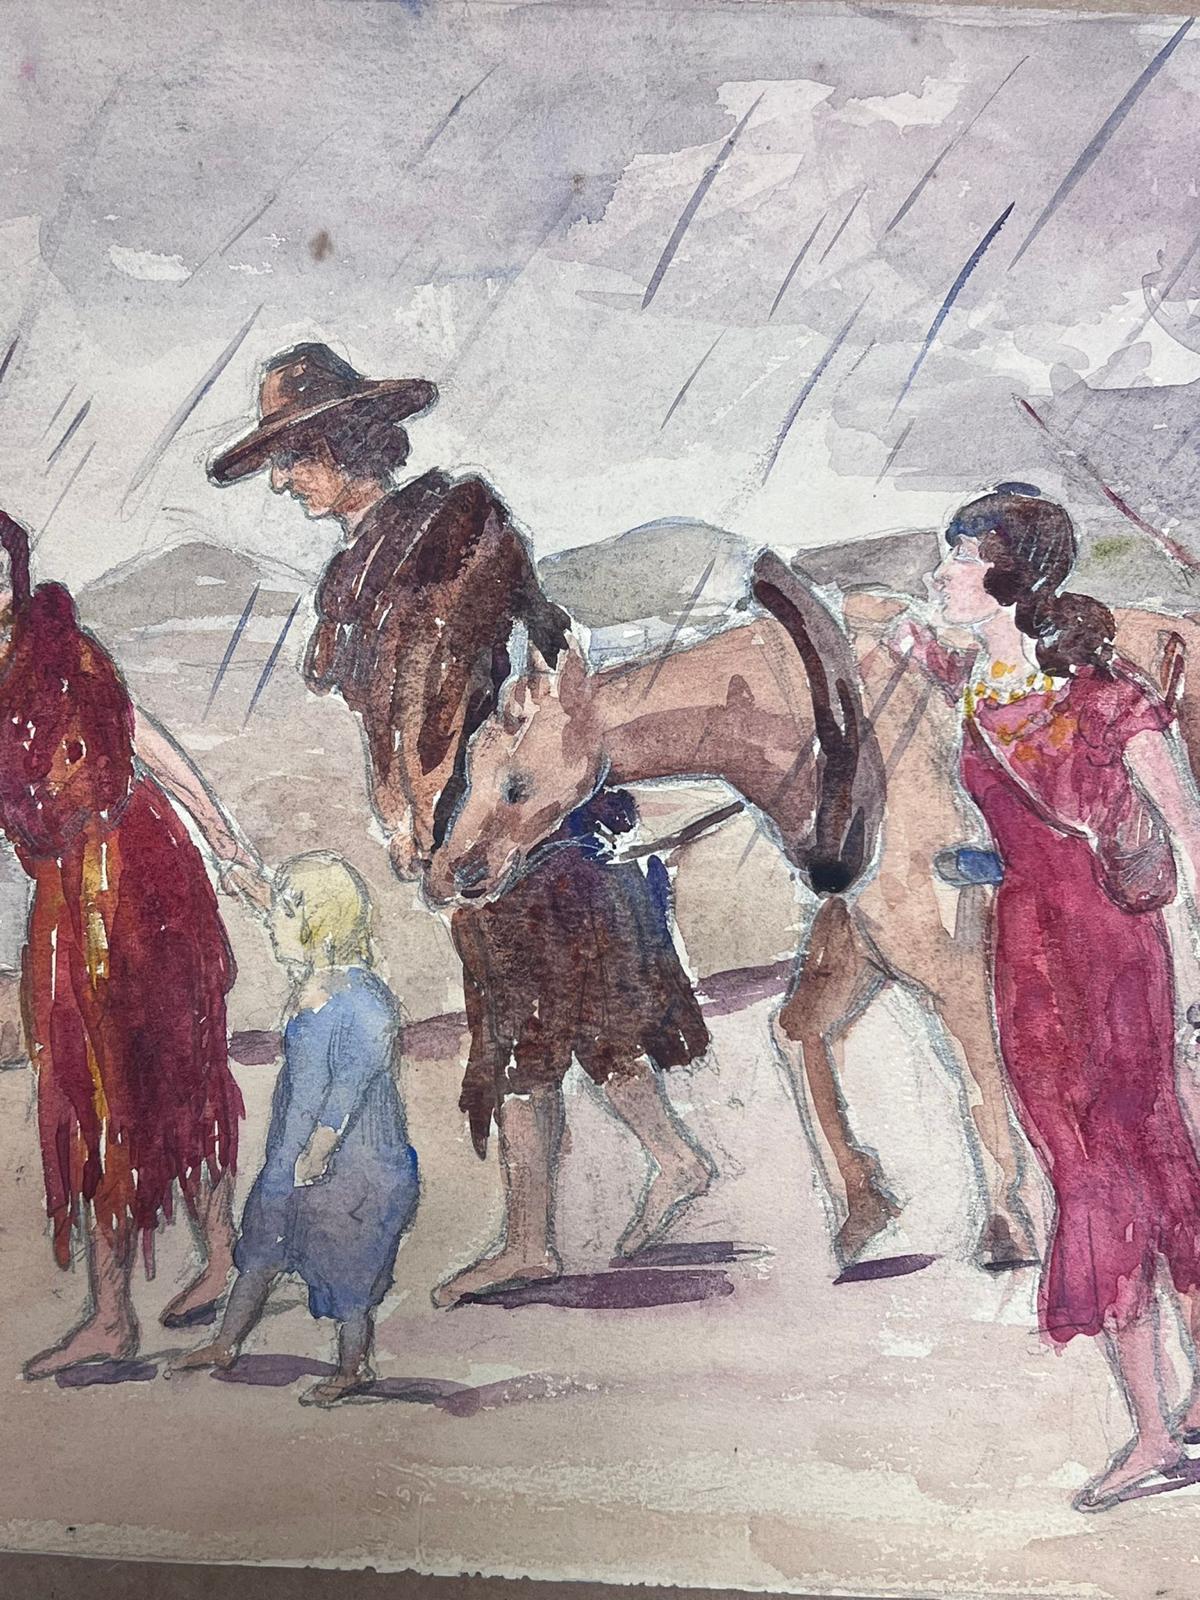 1930's French Impressionist Beach Figures & Animals Walking Through Rain - Gray Figurative Painting by Louise Alix